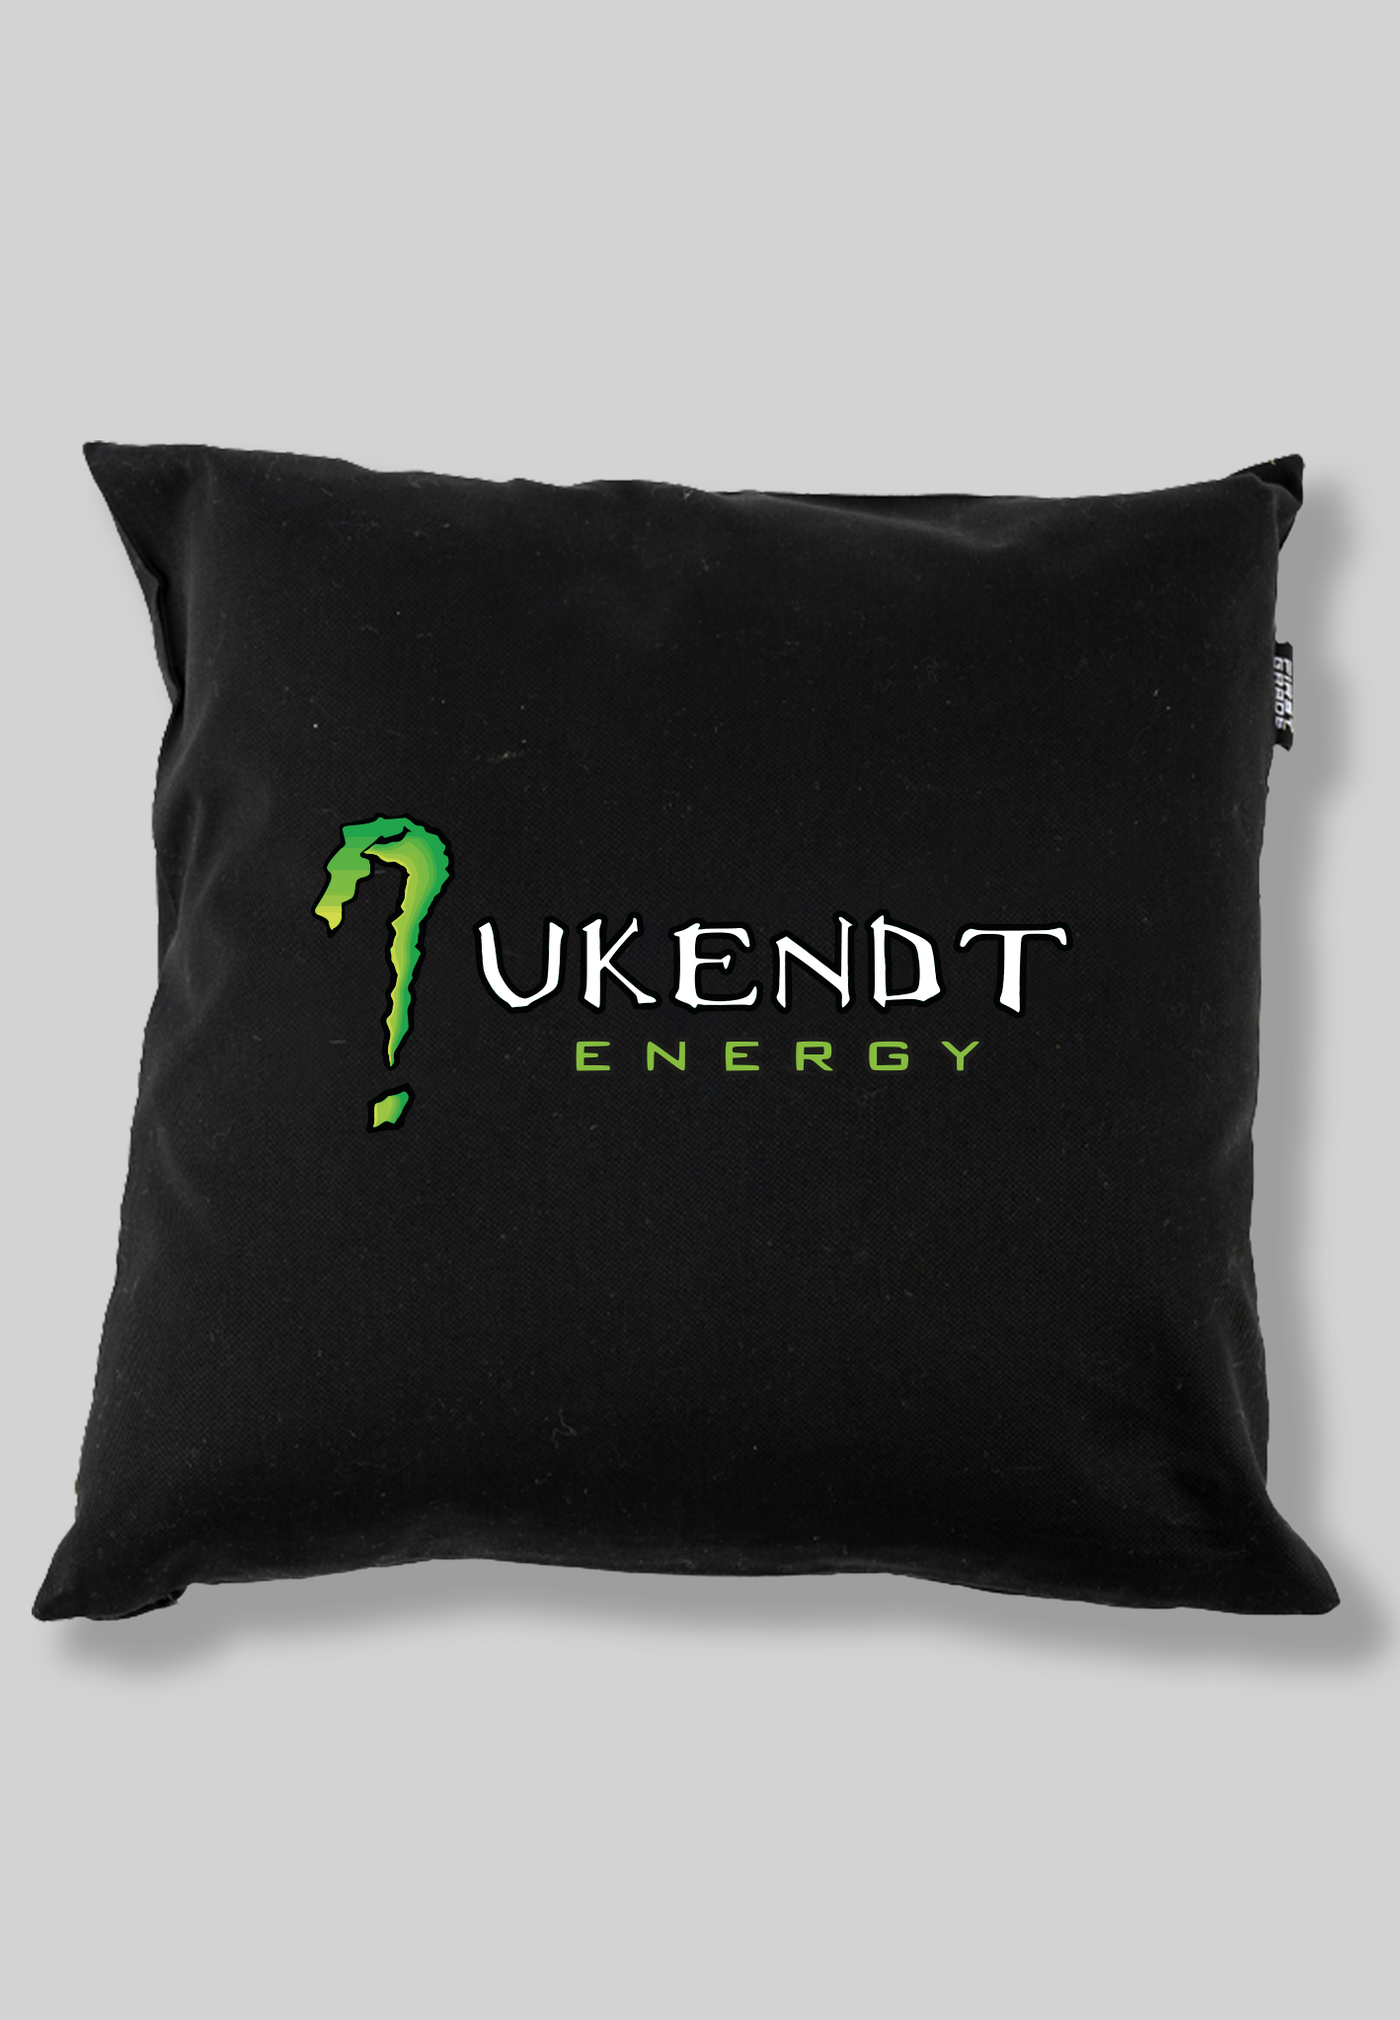 GEX "Unknown Energy" - Pillow cover